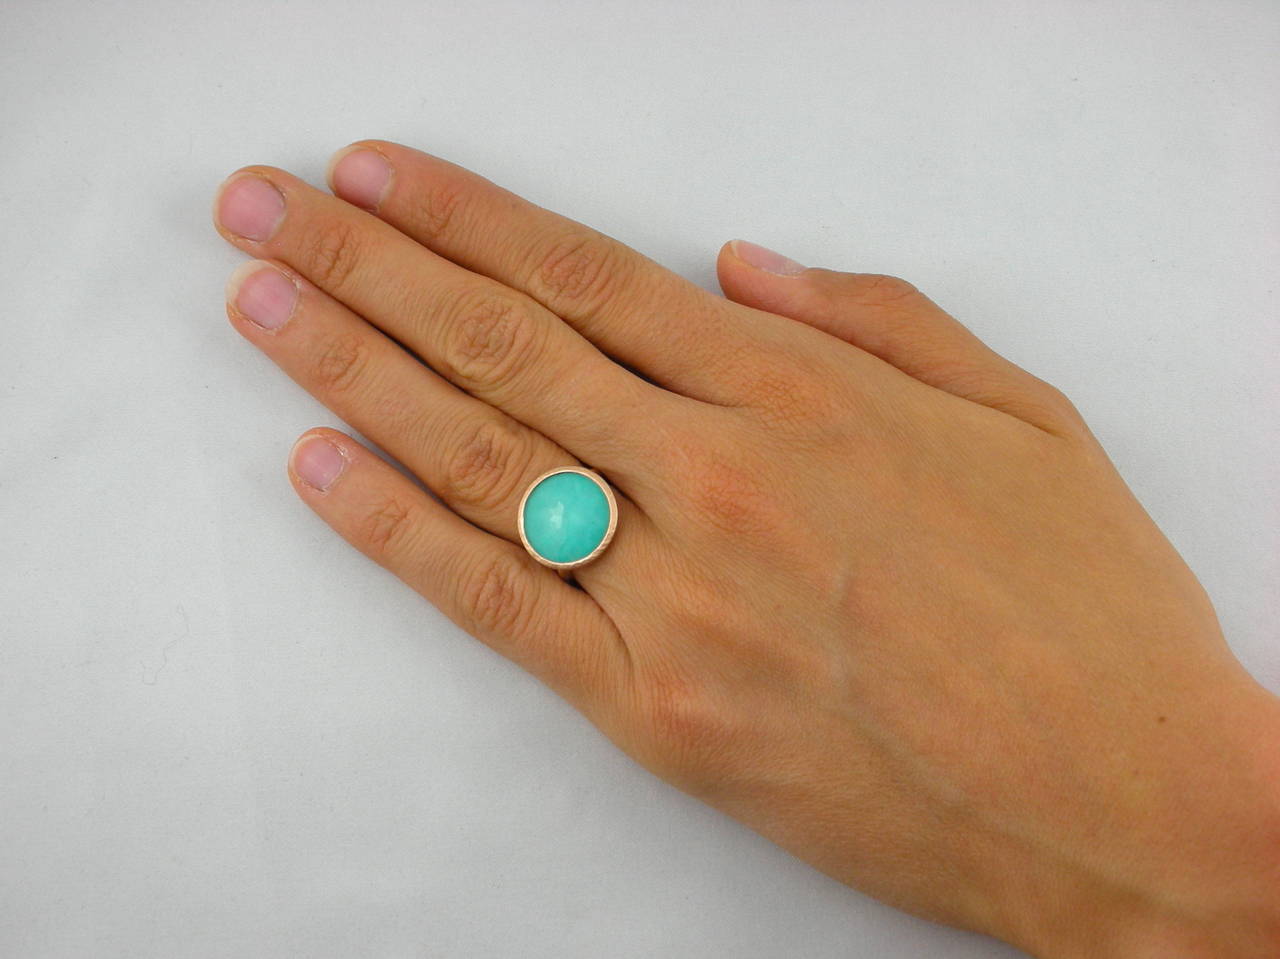 Jona design collection, hand crafted in Italy, 18 Karat rose gold ring set with a crazy cut Quartz over Turquoise, weighing 7.18 carats. 
 Size US 6.5, can be sized to any specification.
Dimensions : Dm 0.62 in x H 0.90 in x D 0.27 in - Dm 16 mm x H